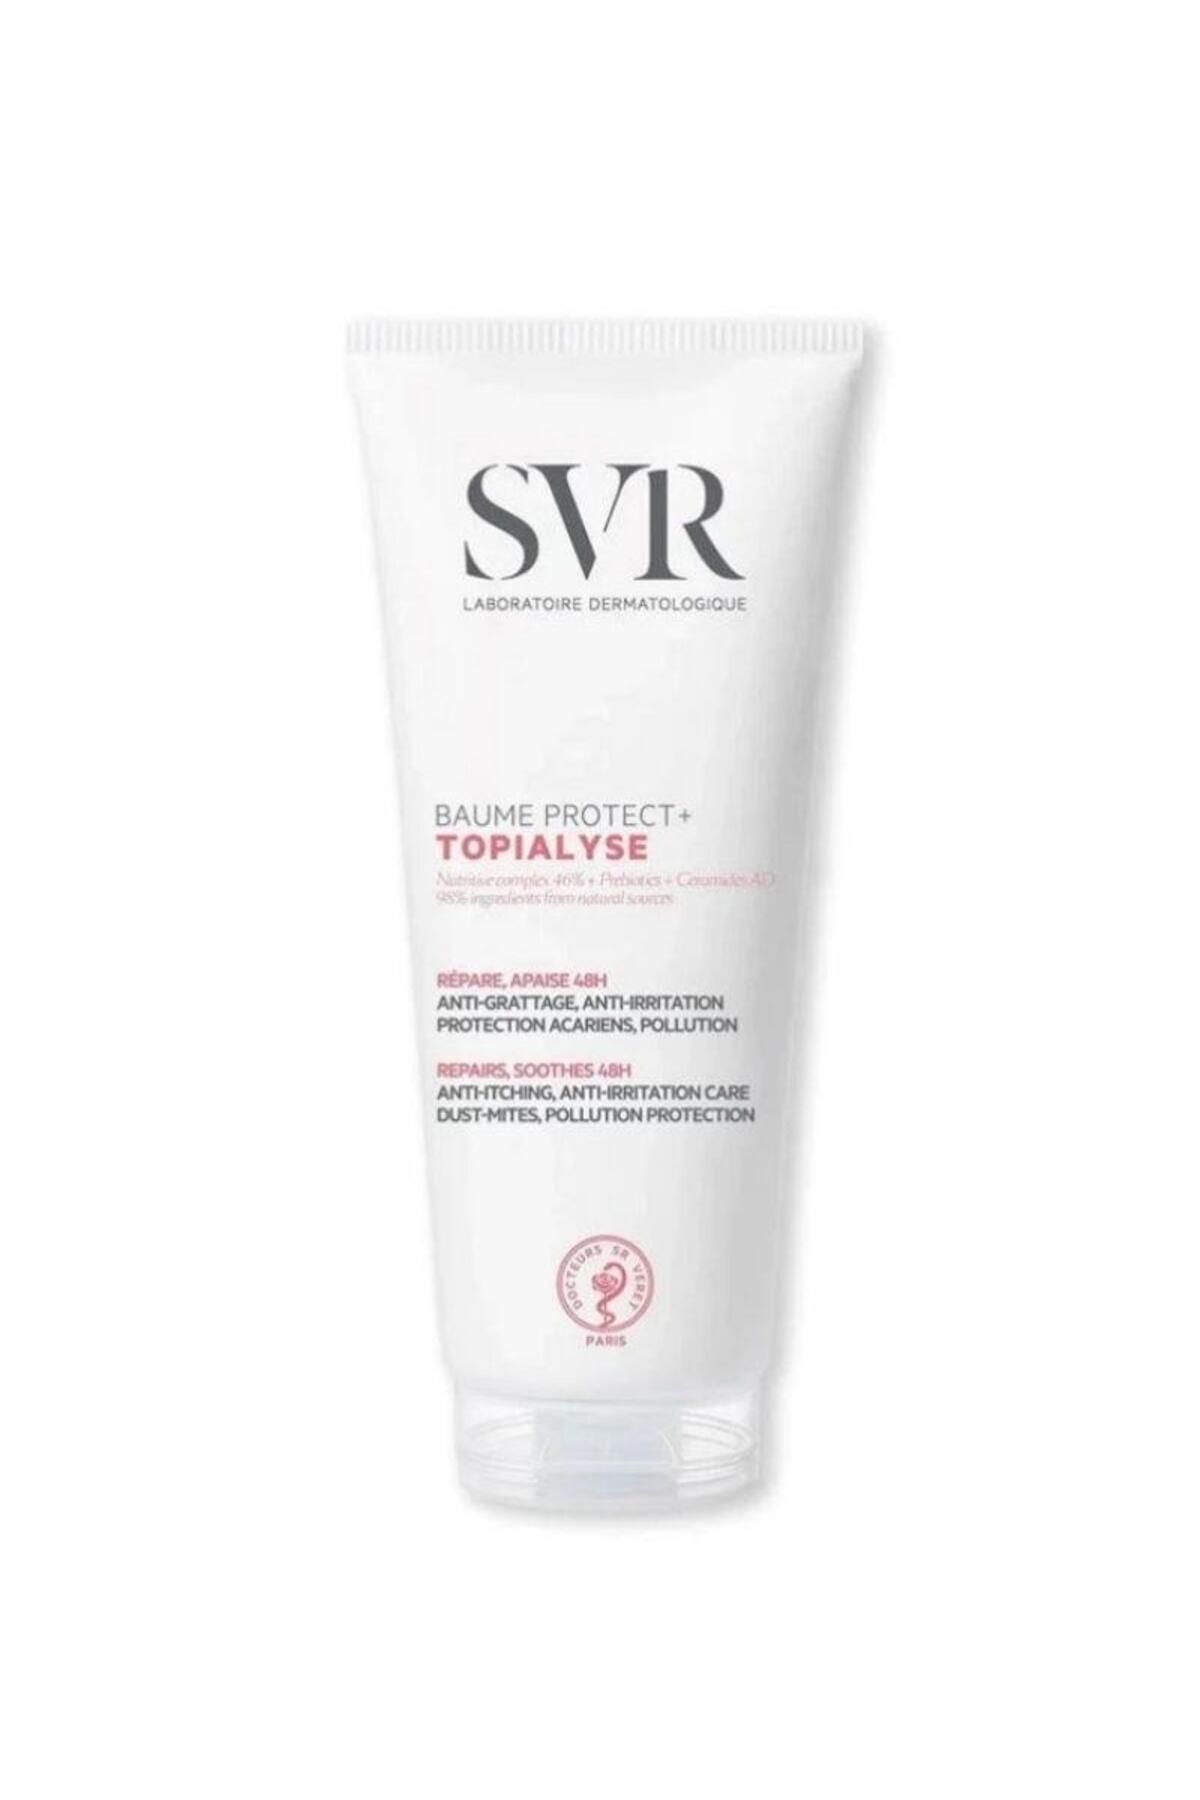 SVR Topialyse Baume Protect+ 200 Ml